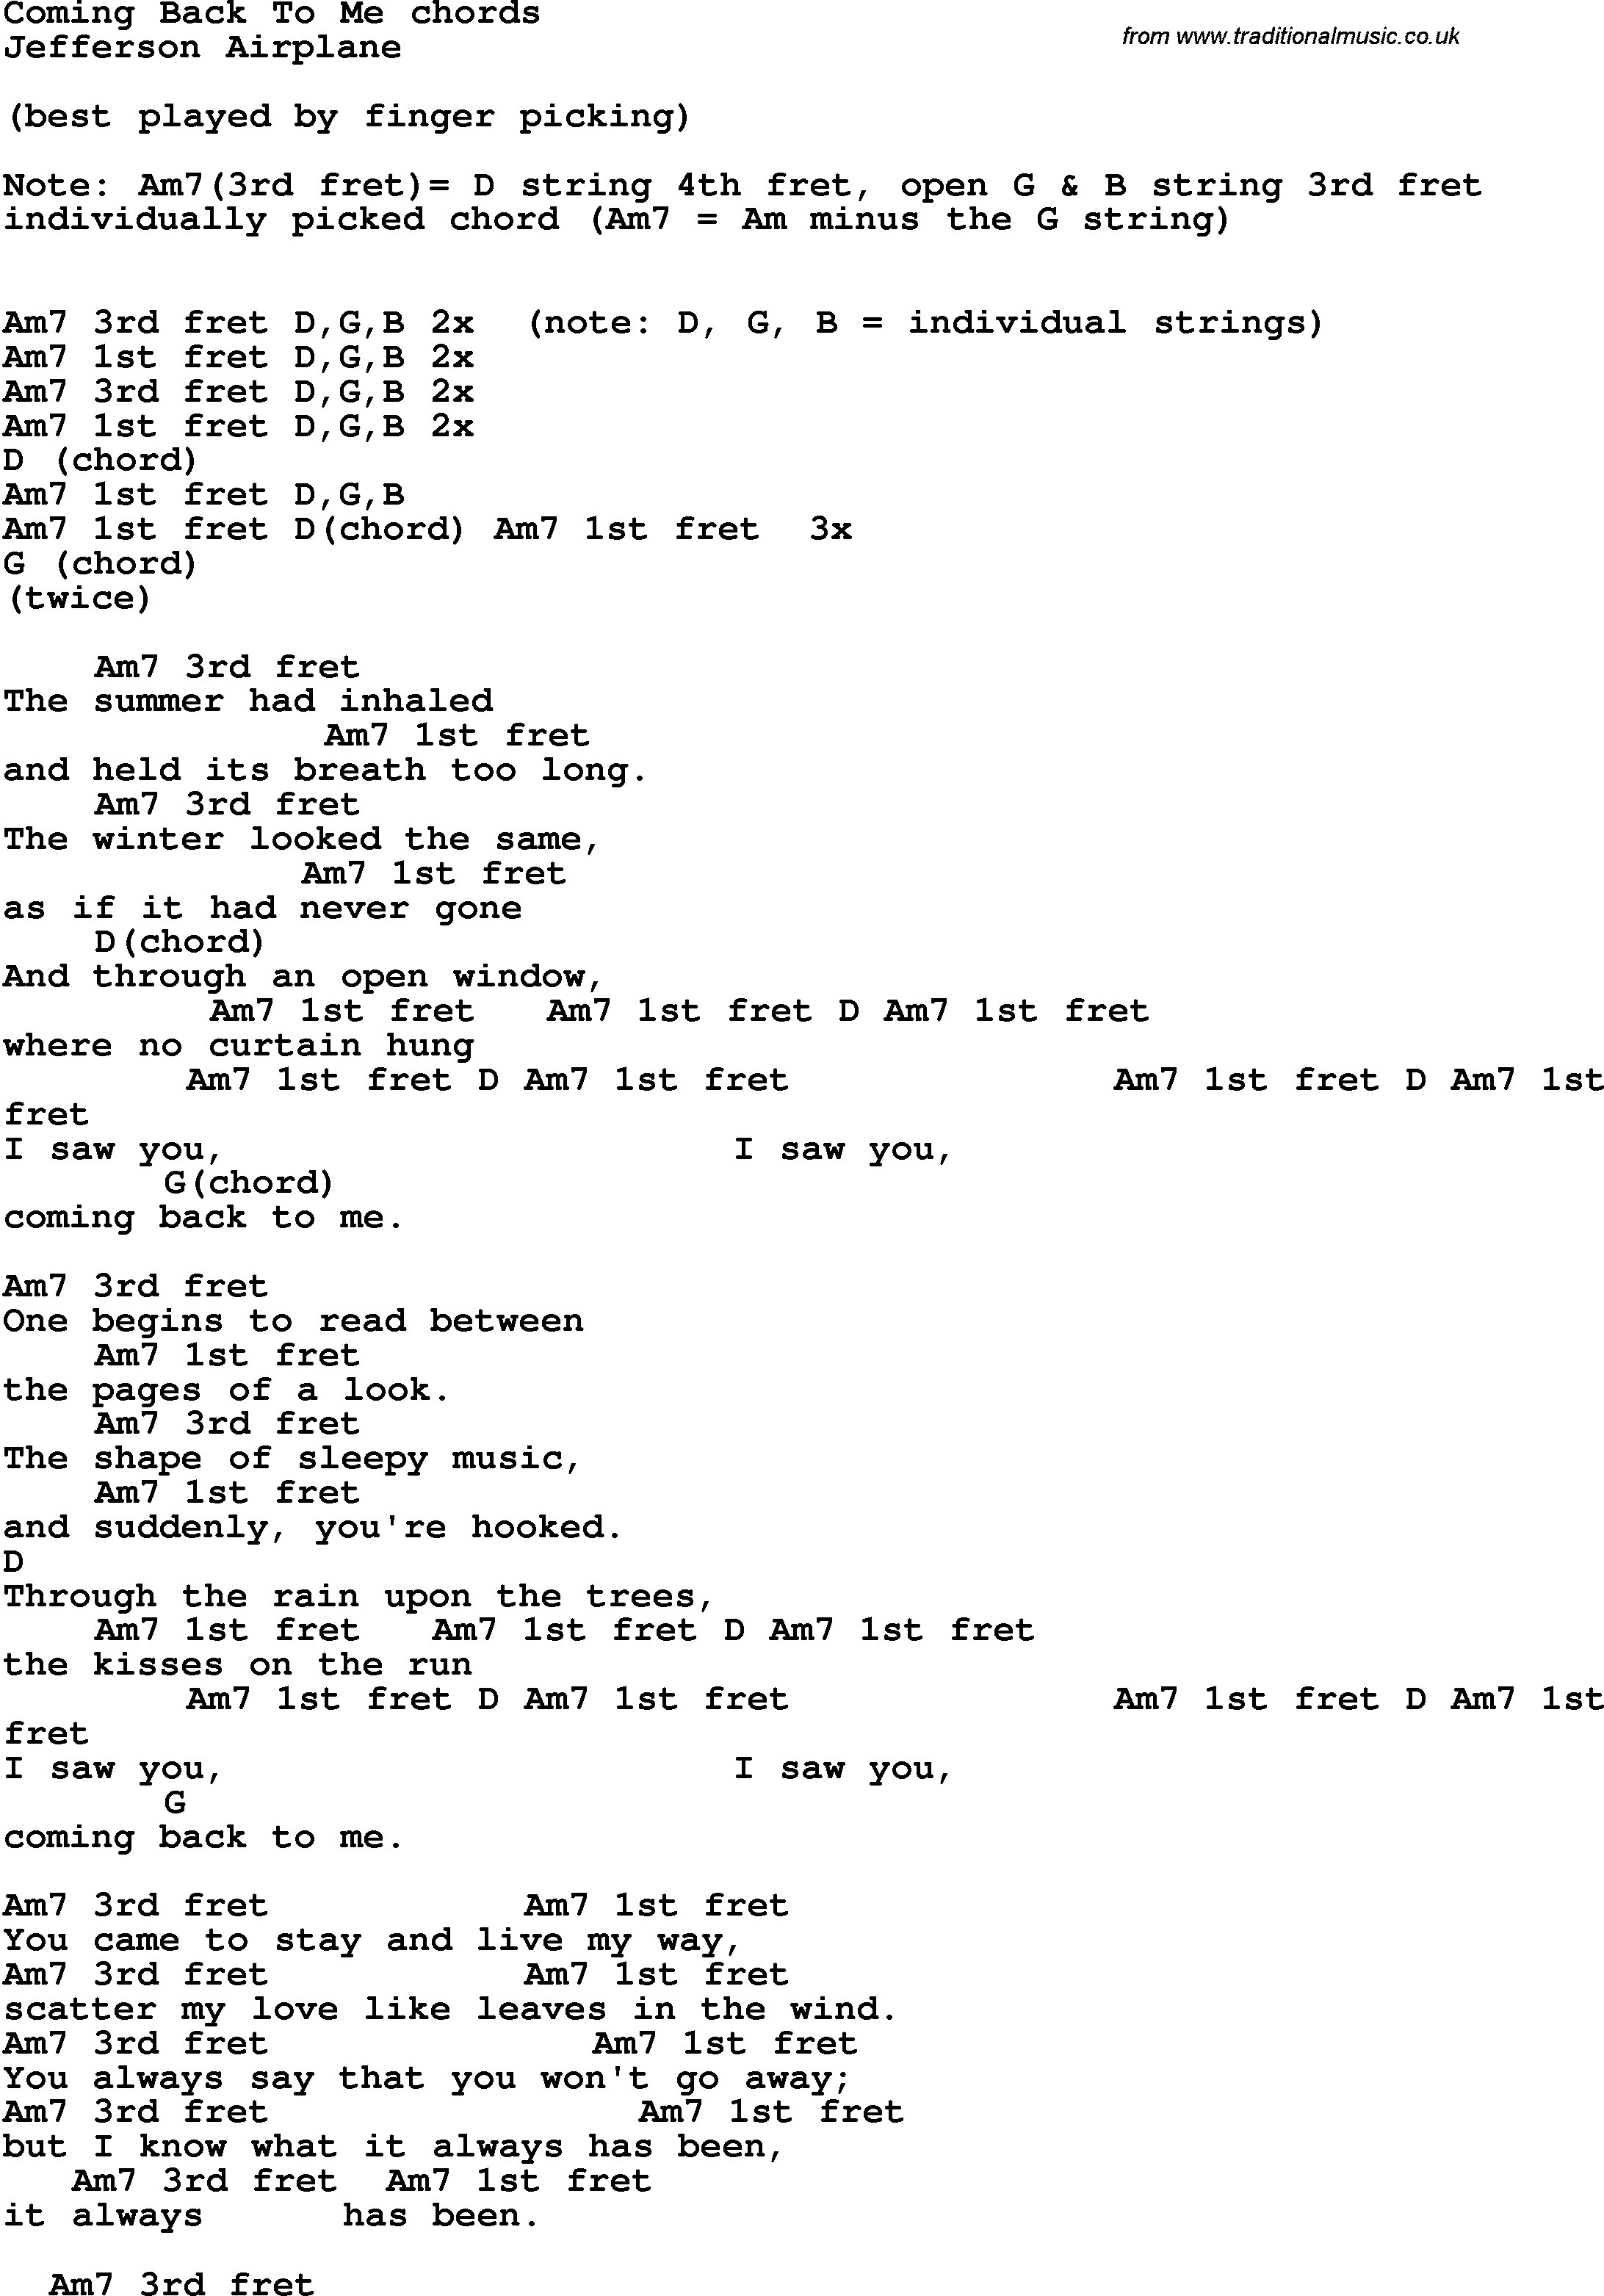 Song Lyrics with guitar chords for Coming Back To Me